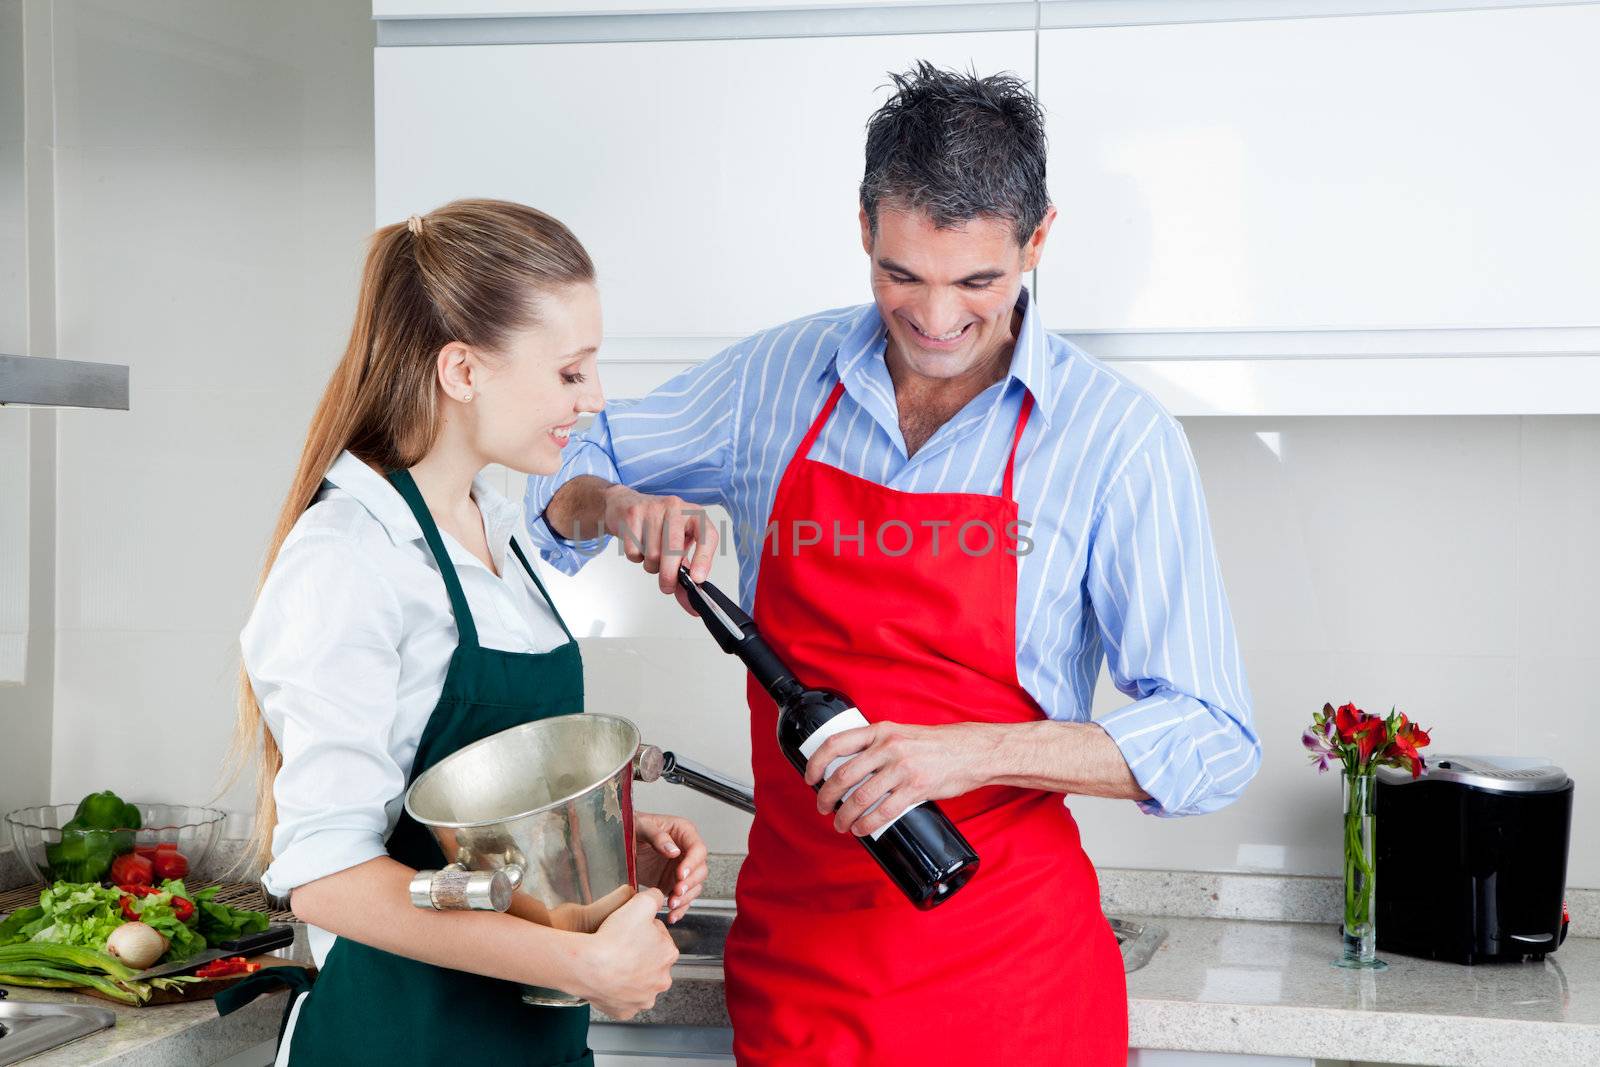 Man and woman opening wine bottle at home in kitchen.